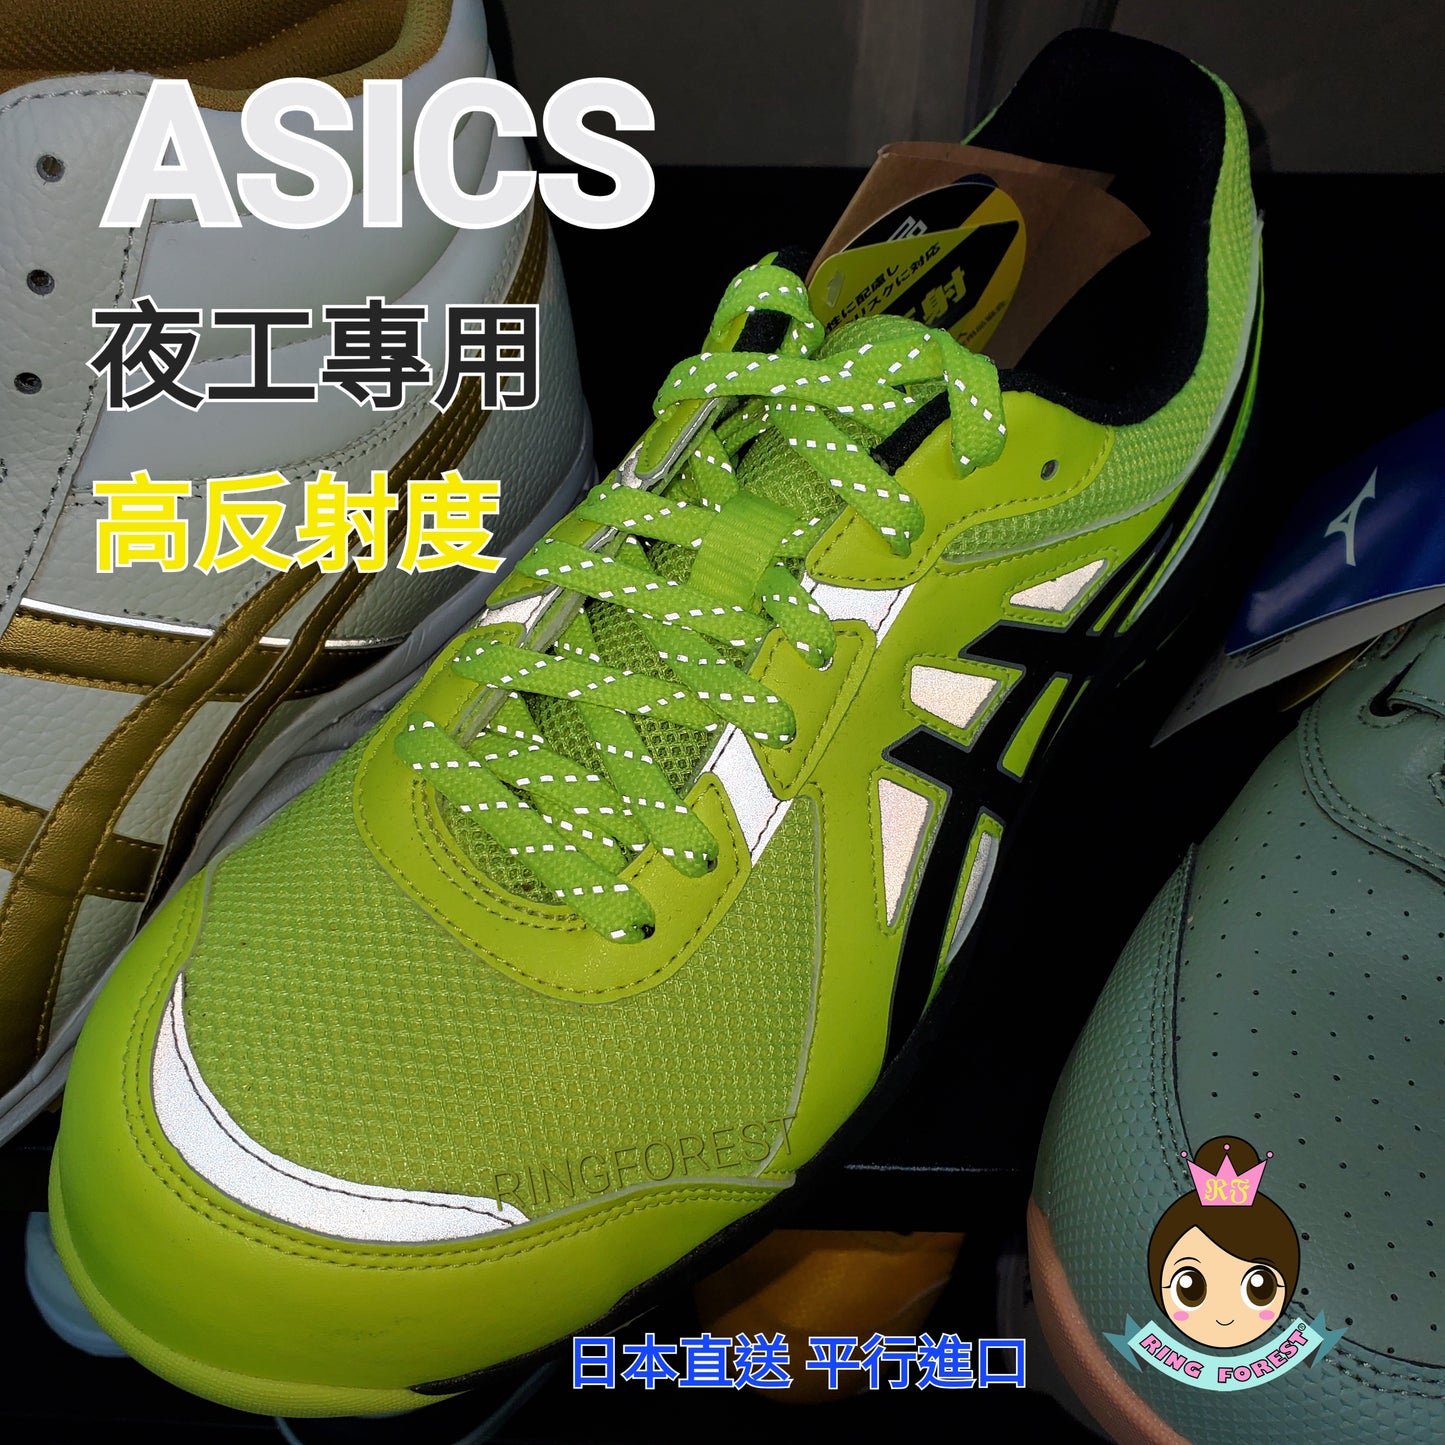 🎌Japan🎌 [In stock▪️Ready to ship] ASICS Night Work Fluorescent Yellow EU43.5 27cm US9.5 Safety Shoes JSAA Class A Anti-Slip Boots CP206 JIS CP